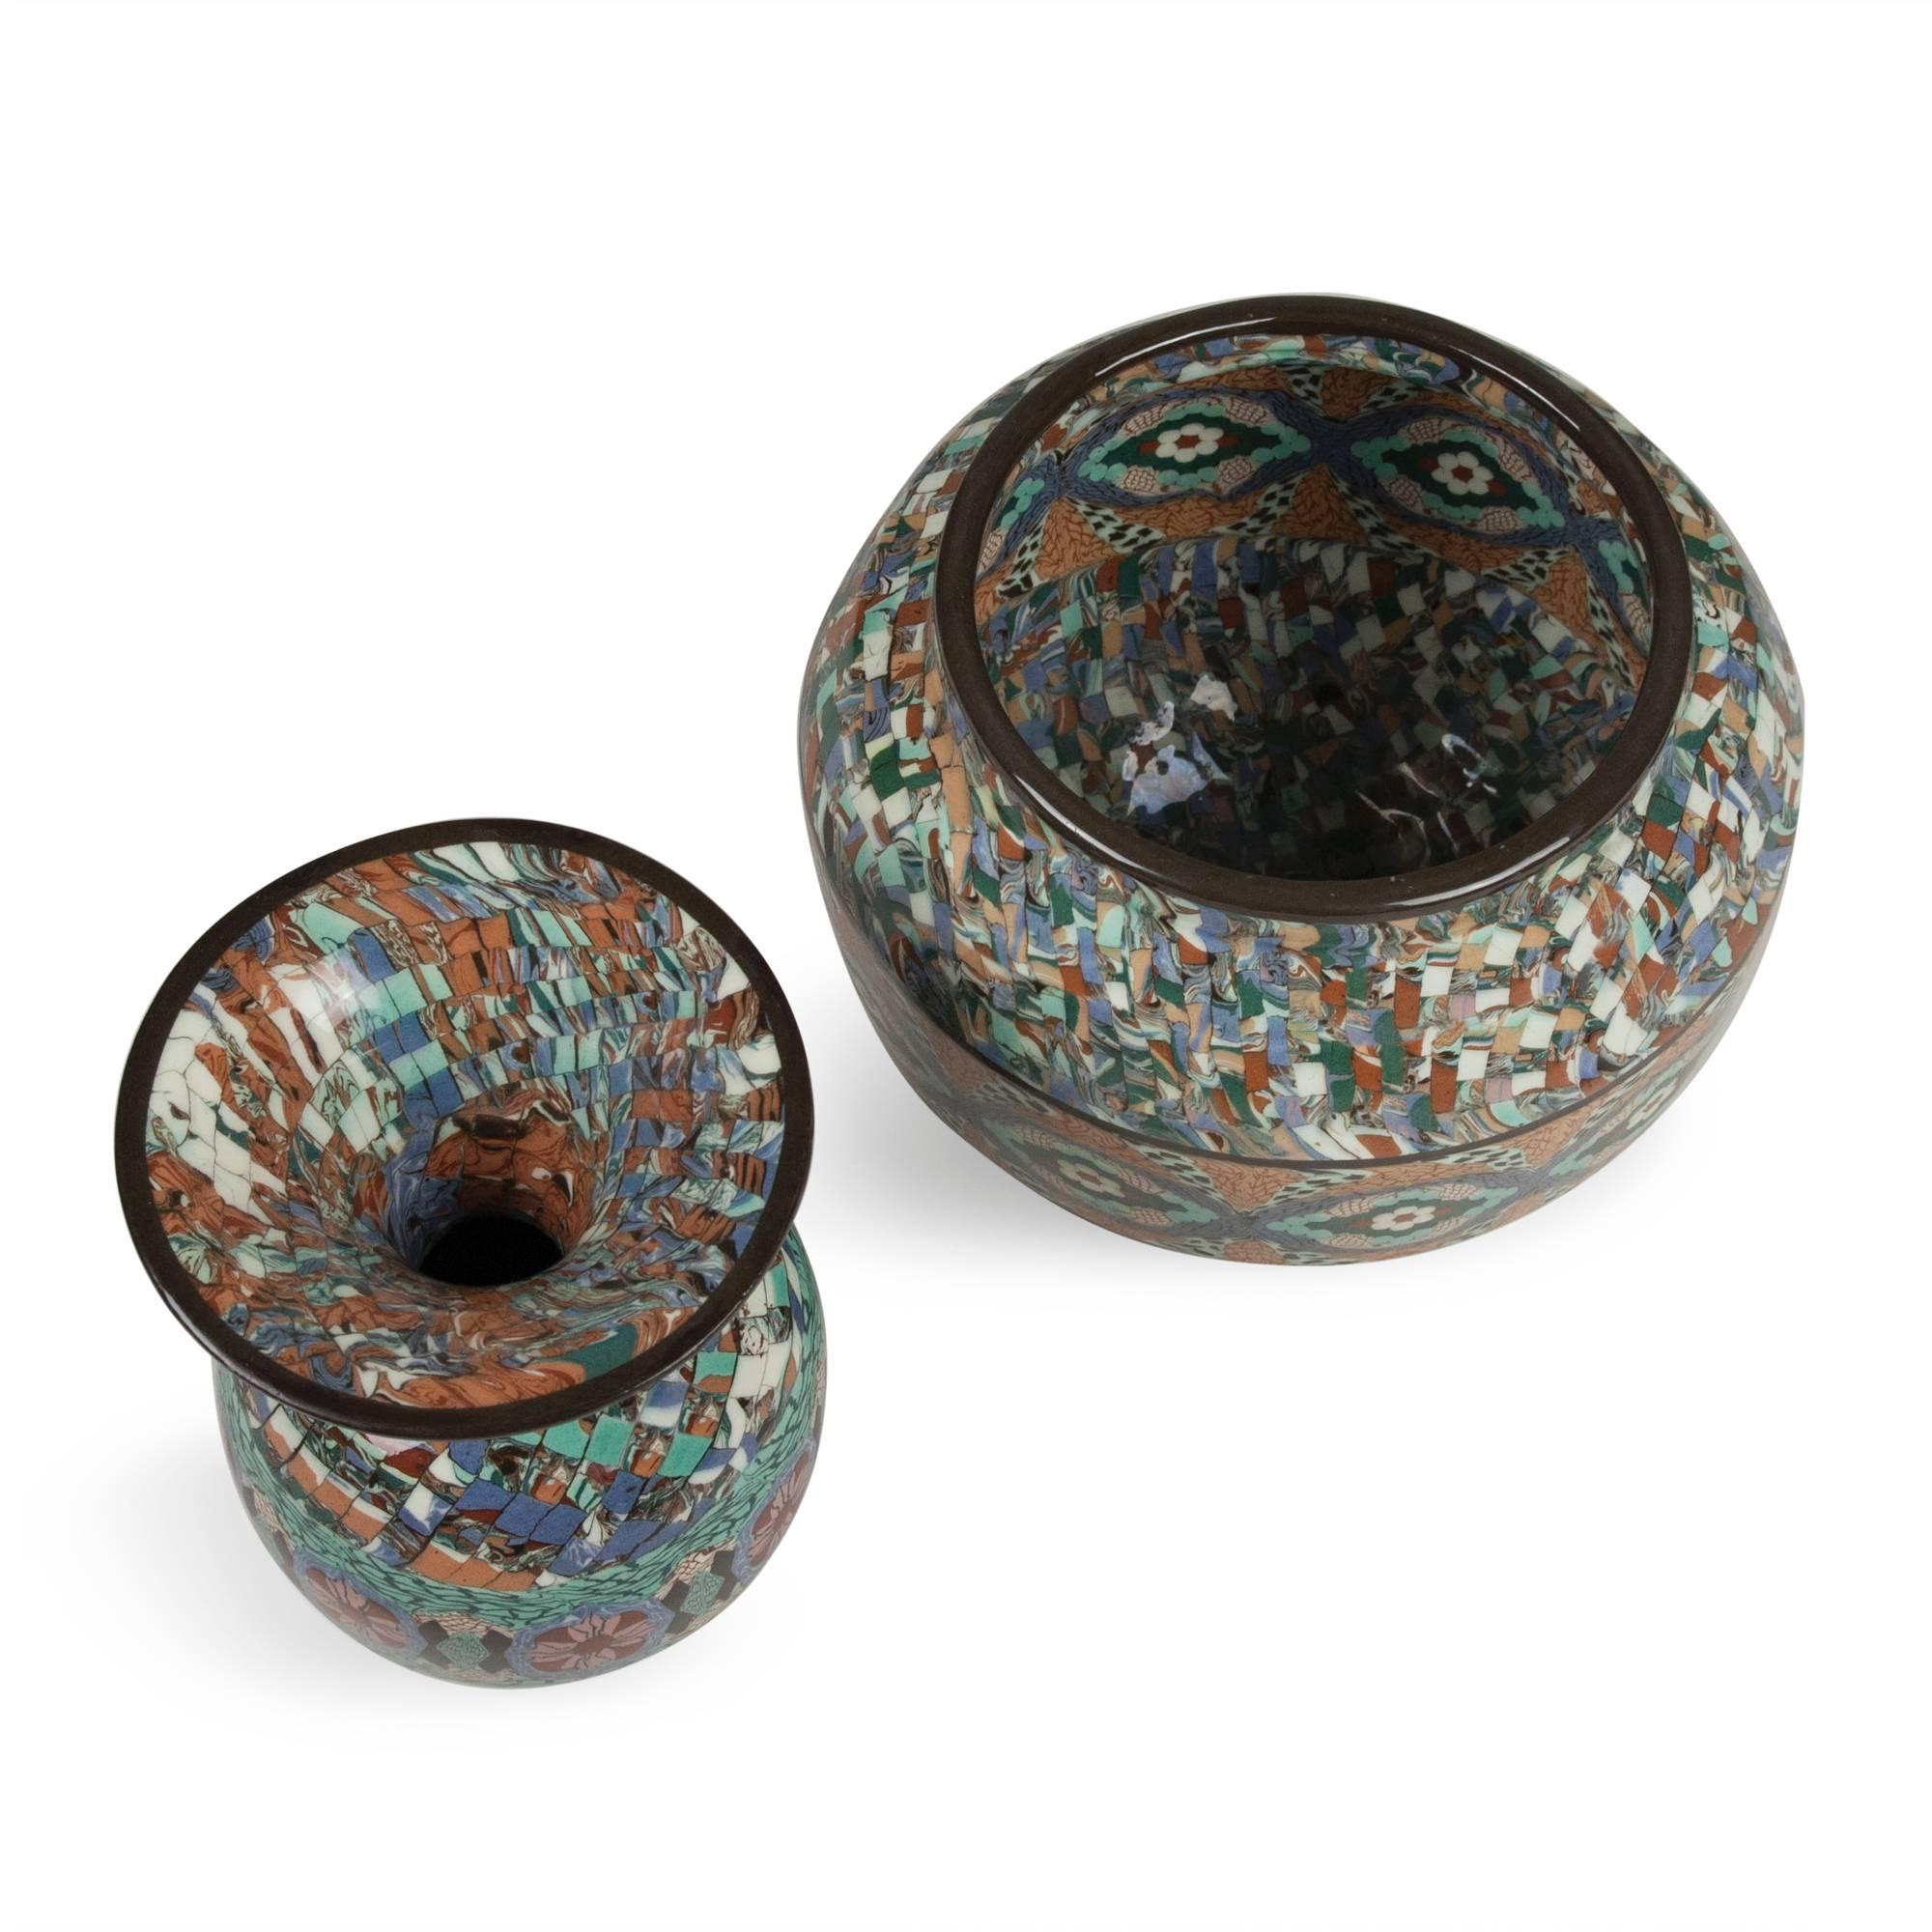 Two vases:
1) Flared neck ceramic vase, the form built by ceramic mosaic elements in colors of blue, grey, black, rust, green and white, by Atelier Gerbino, Vallauris, France, 1980s. Stamped signature to underside. Height 7 1/4 in, diameter 5 1/4